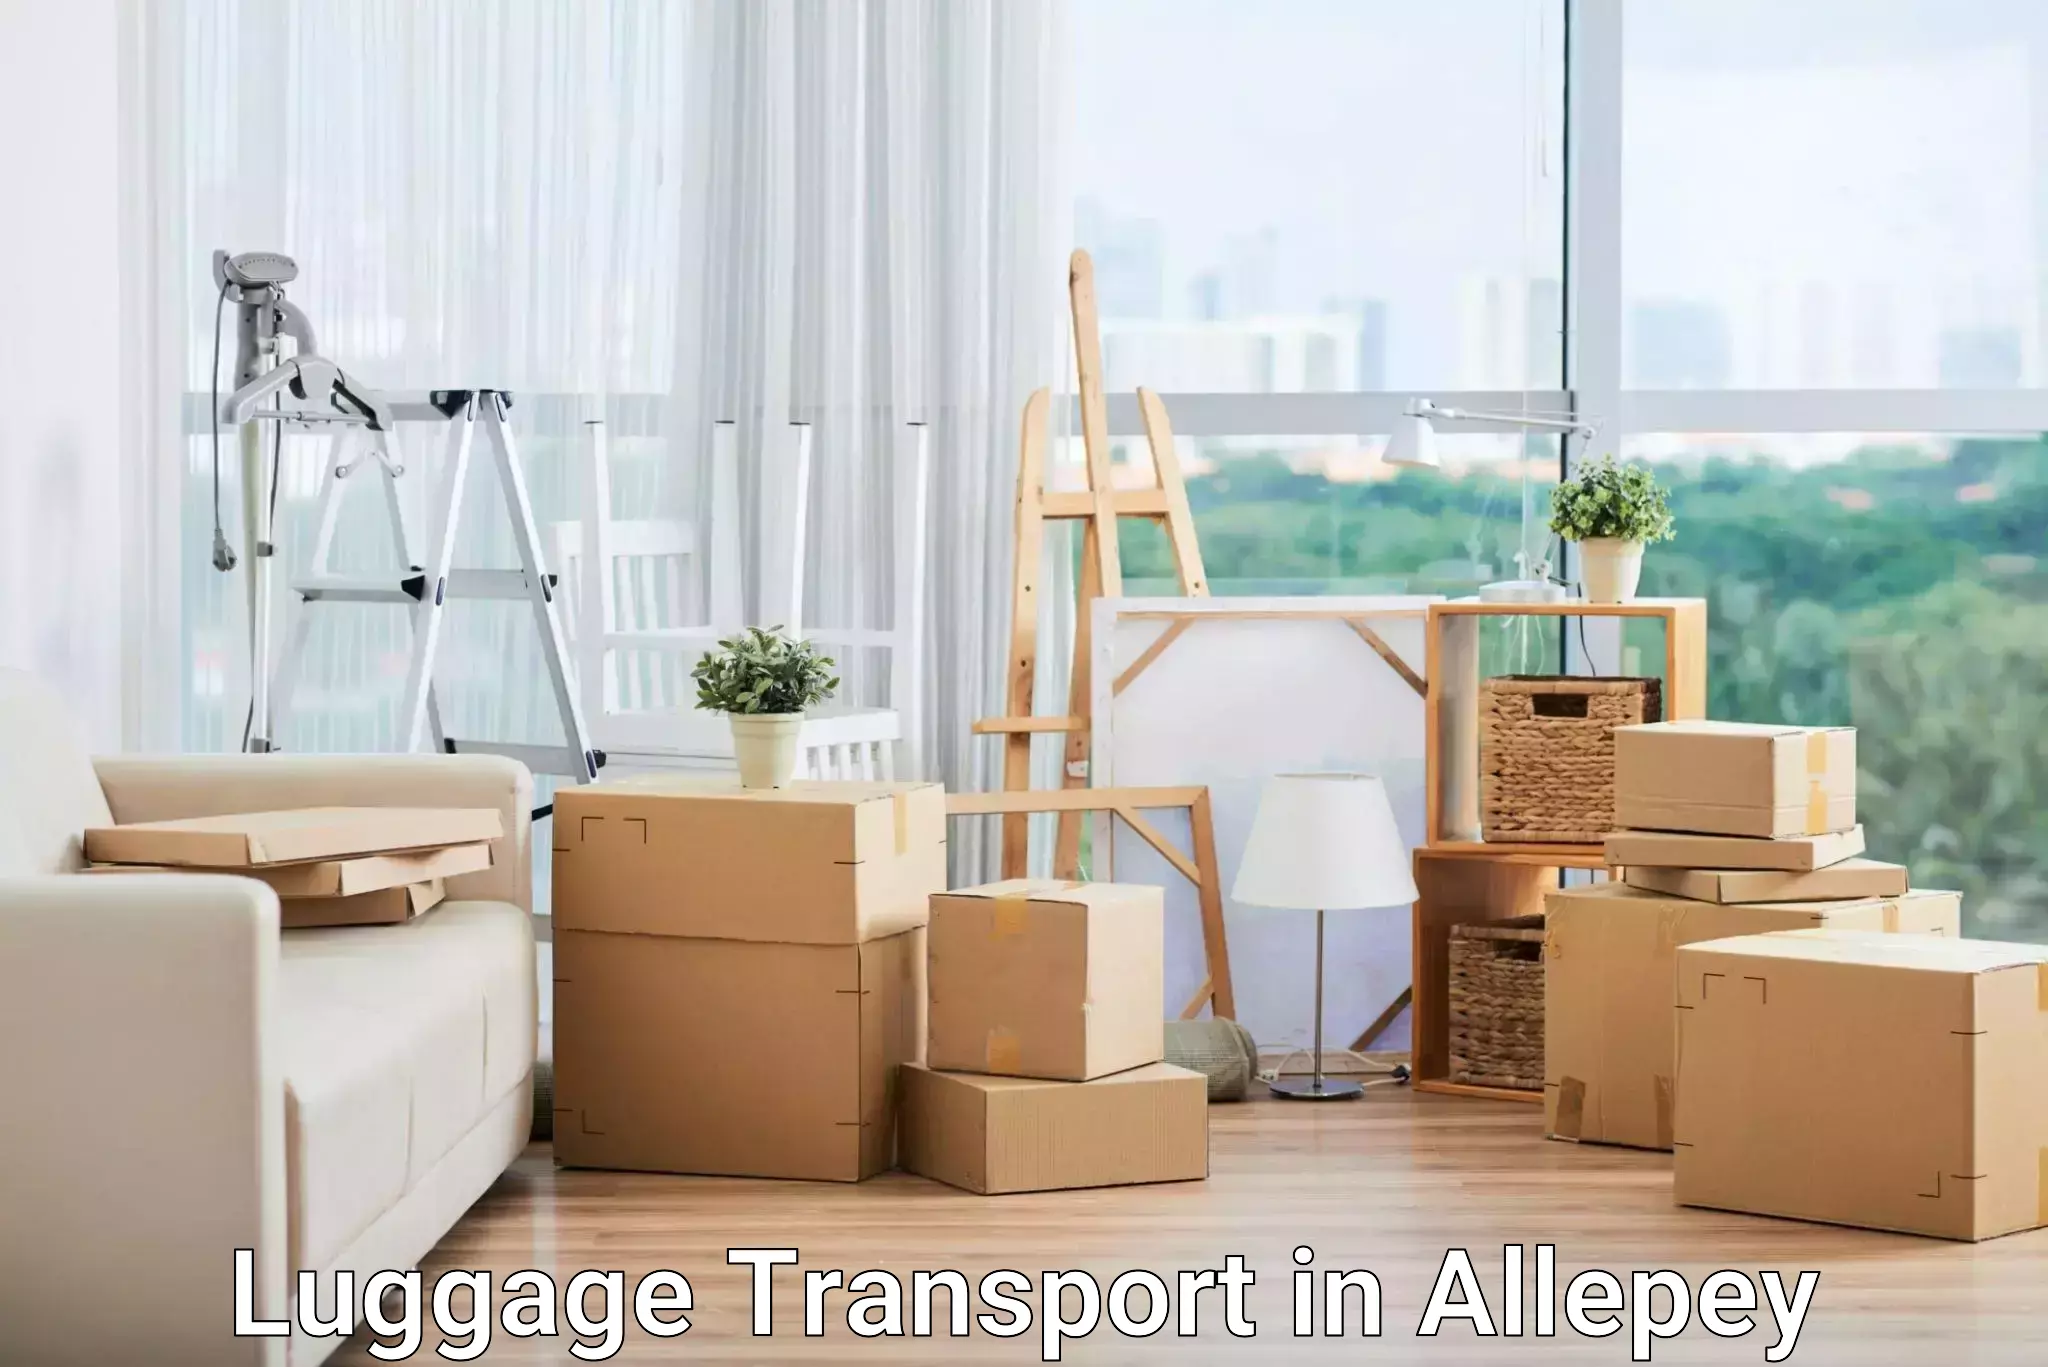 Luggage transport rates in Allepey